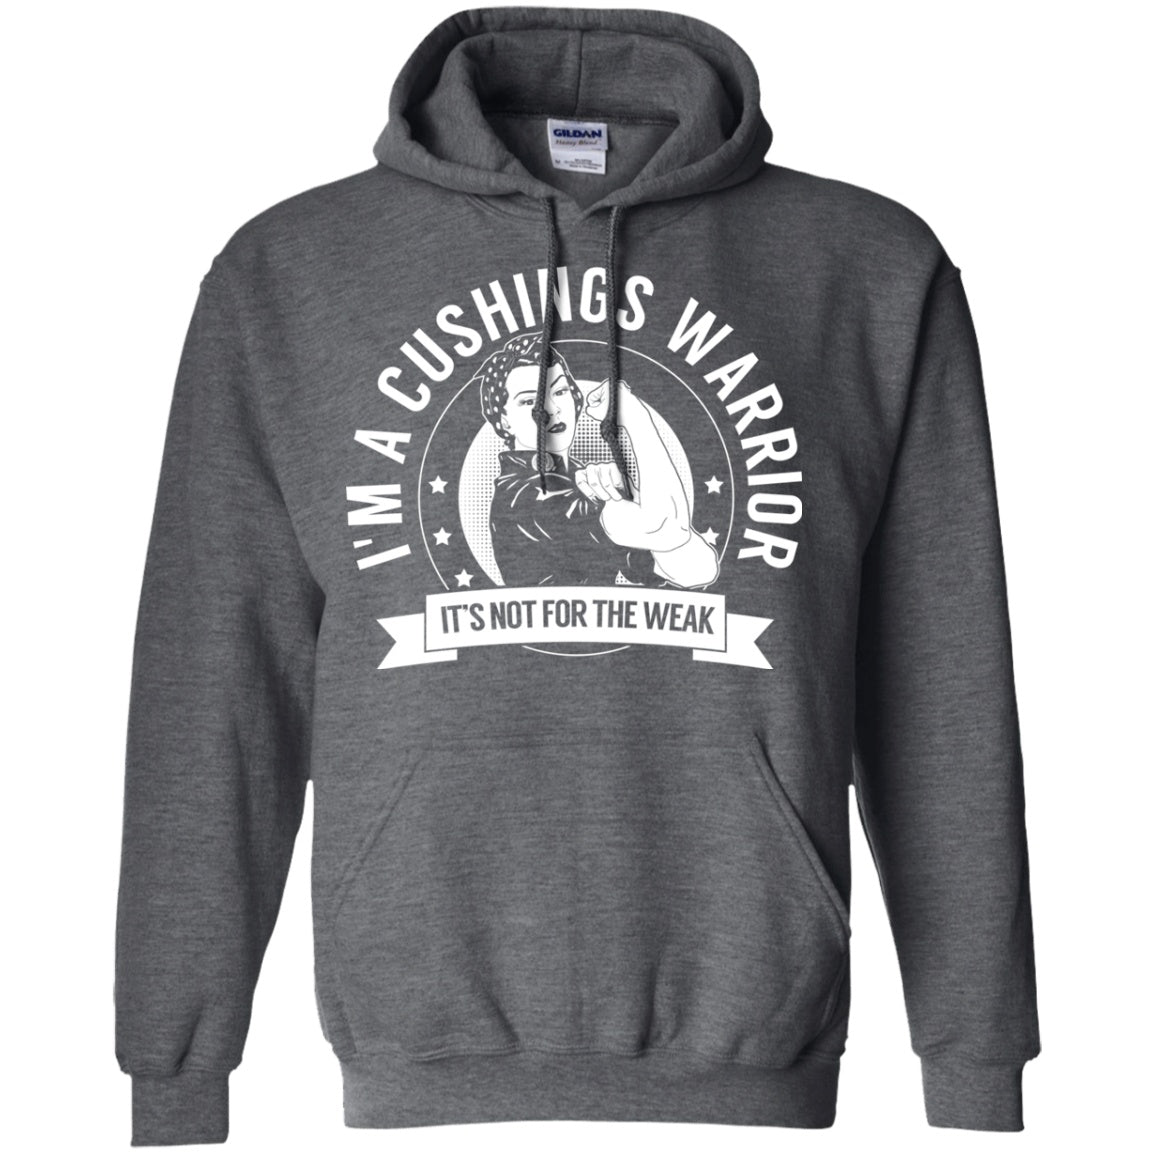 Cushings Warrior Not For The Weak Pullover Hoodie 8 oz. - The Unchargeables